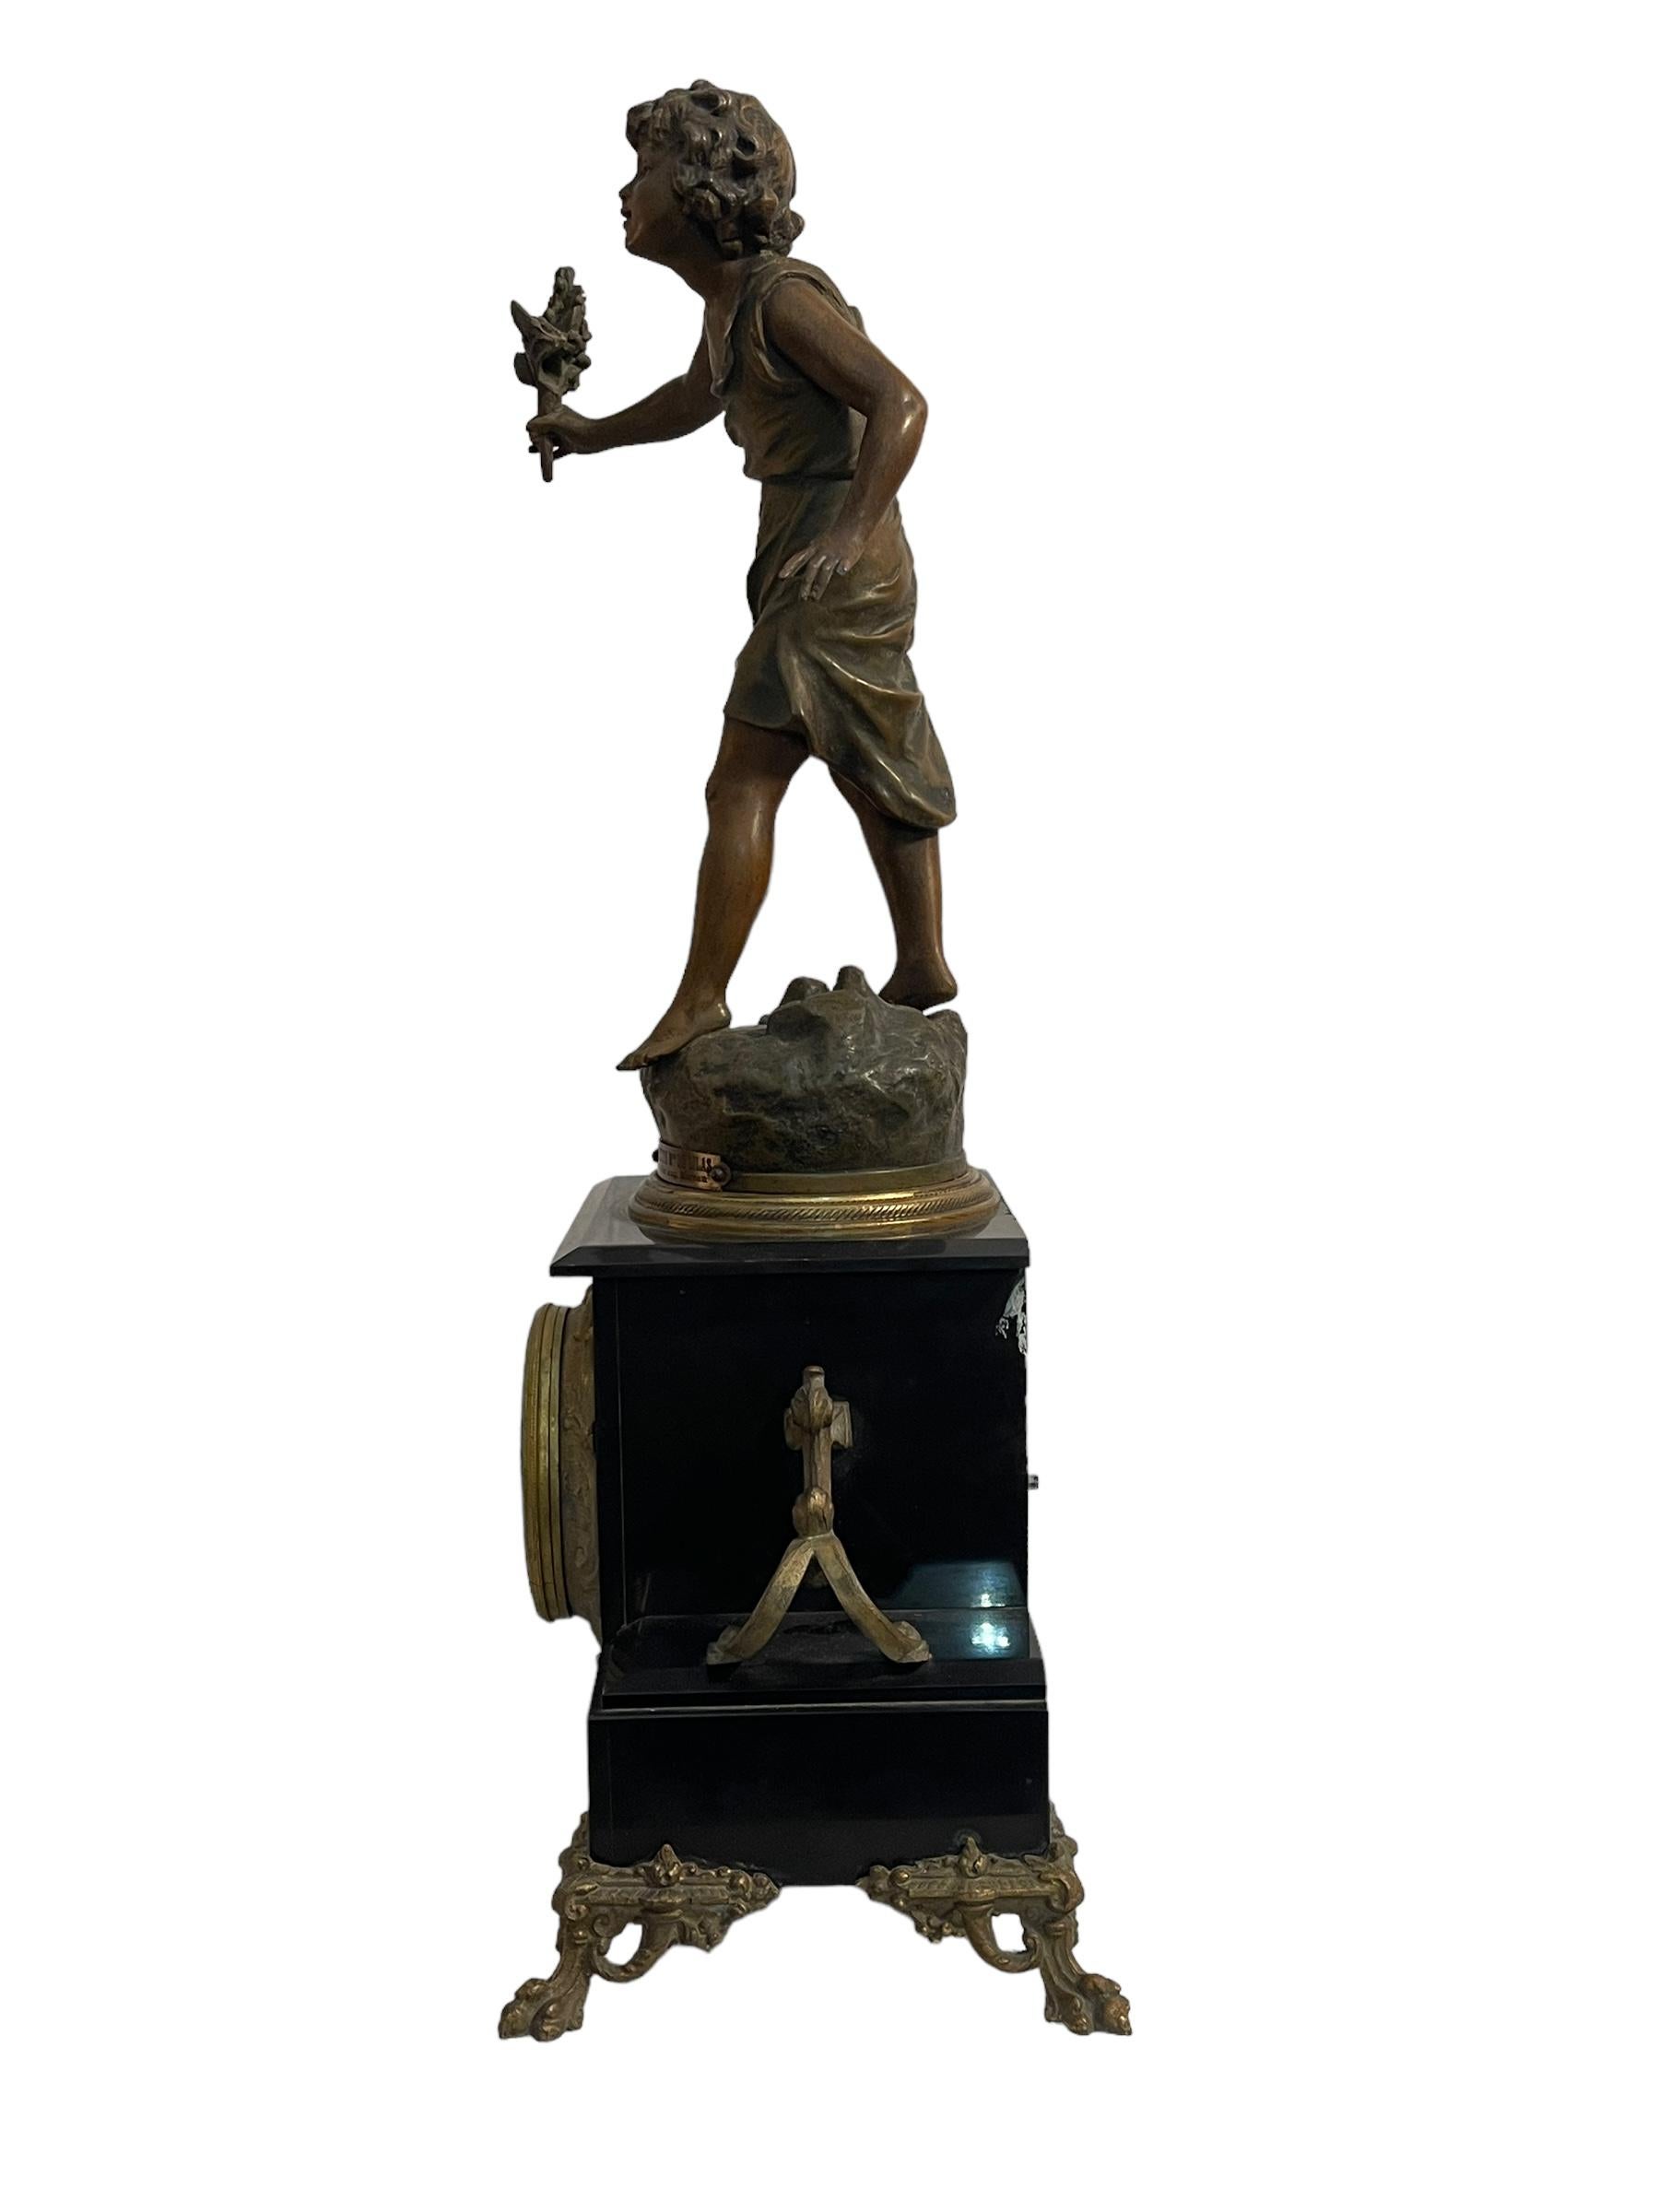 Louis XVI Table clock, late 19th century with mounted bronze sculpture, by Auguste Moreau For Sale